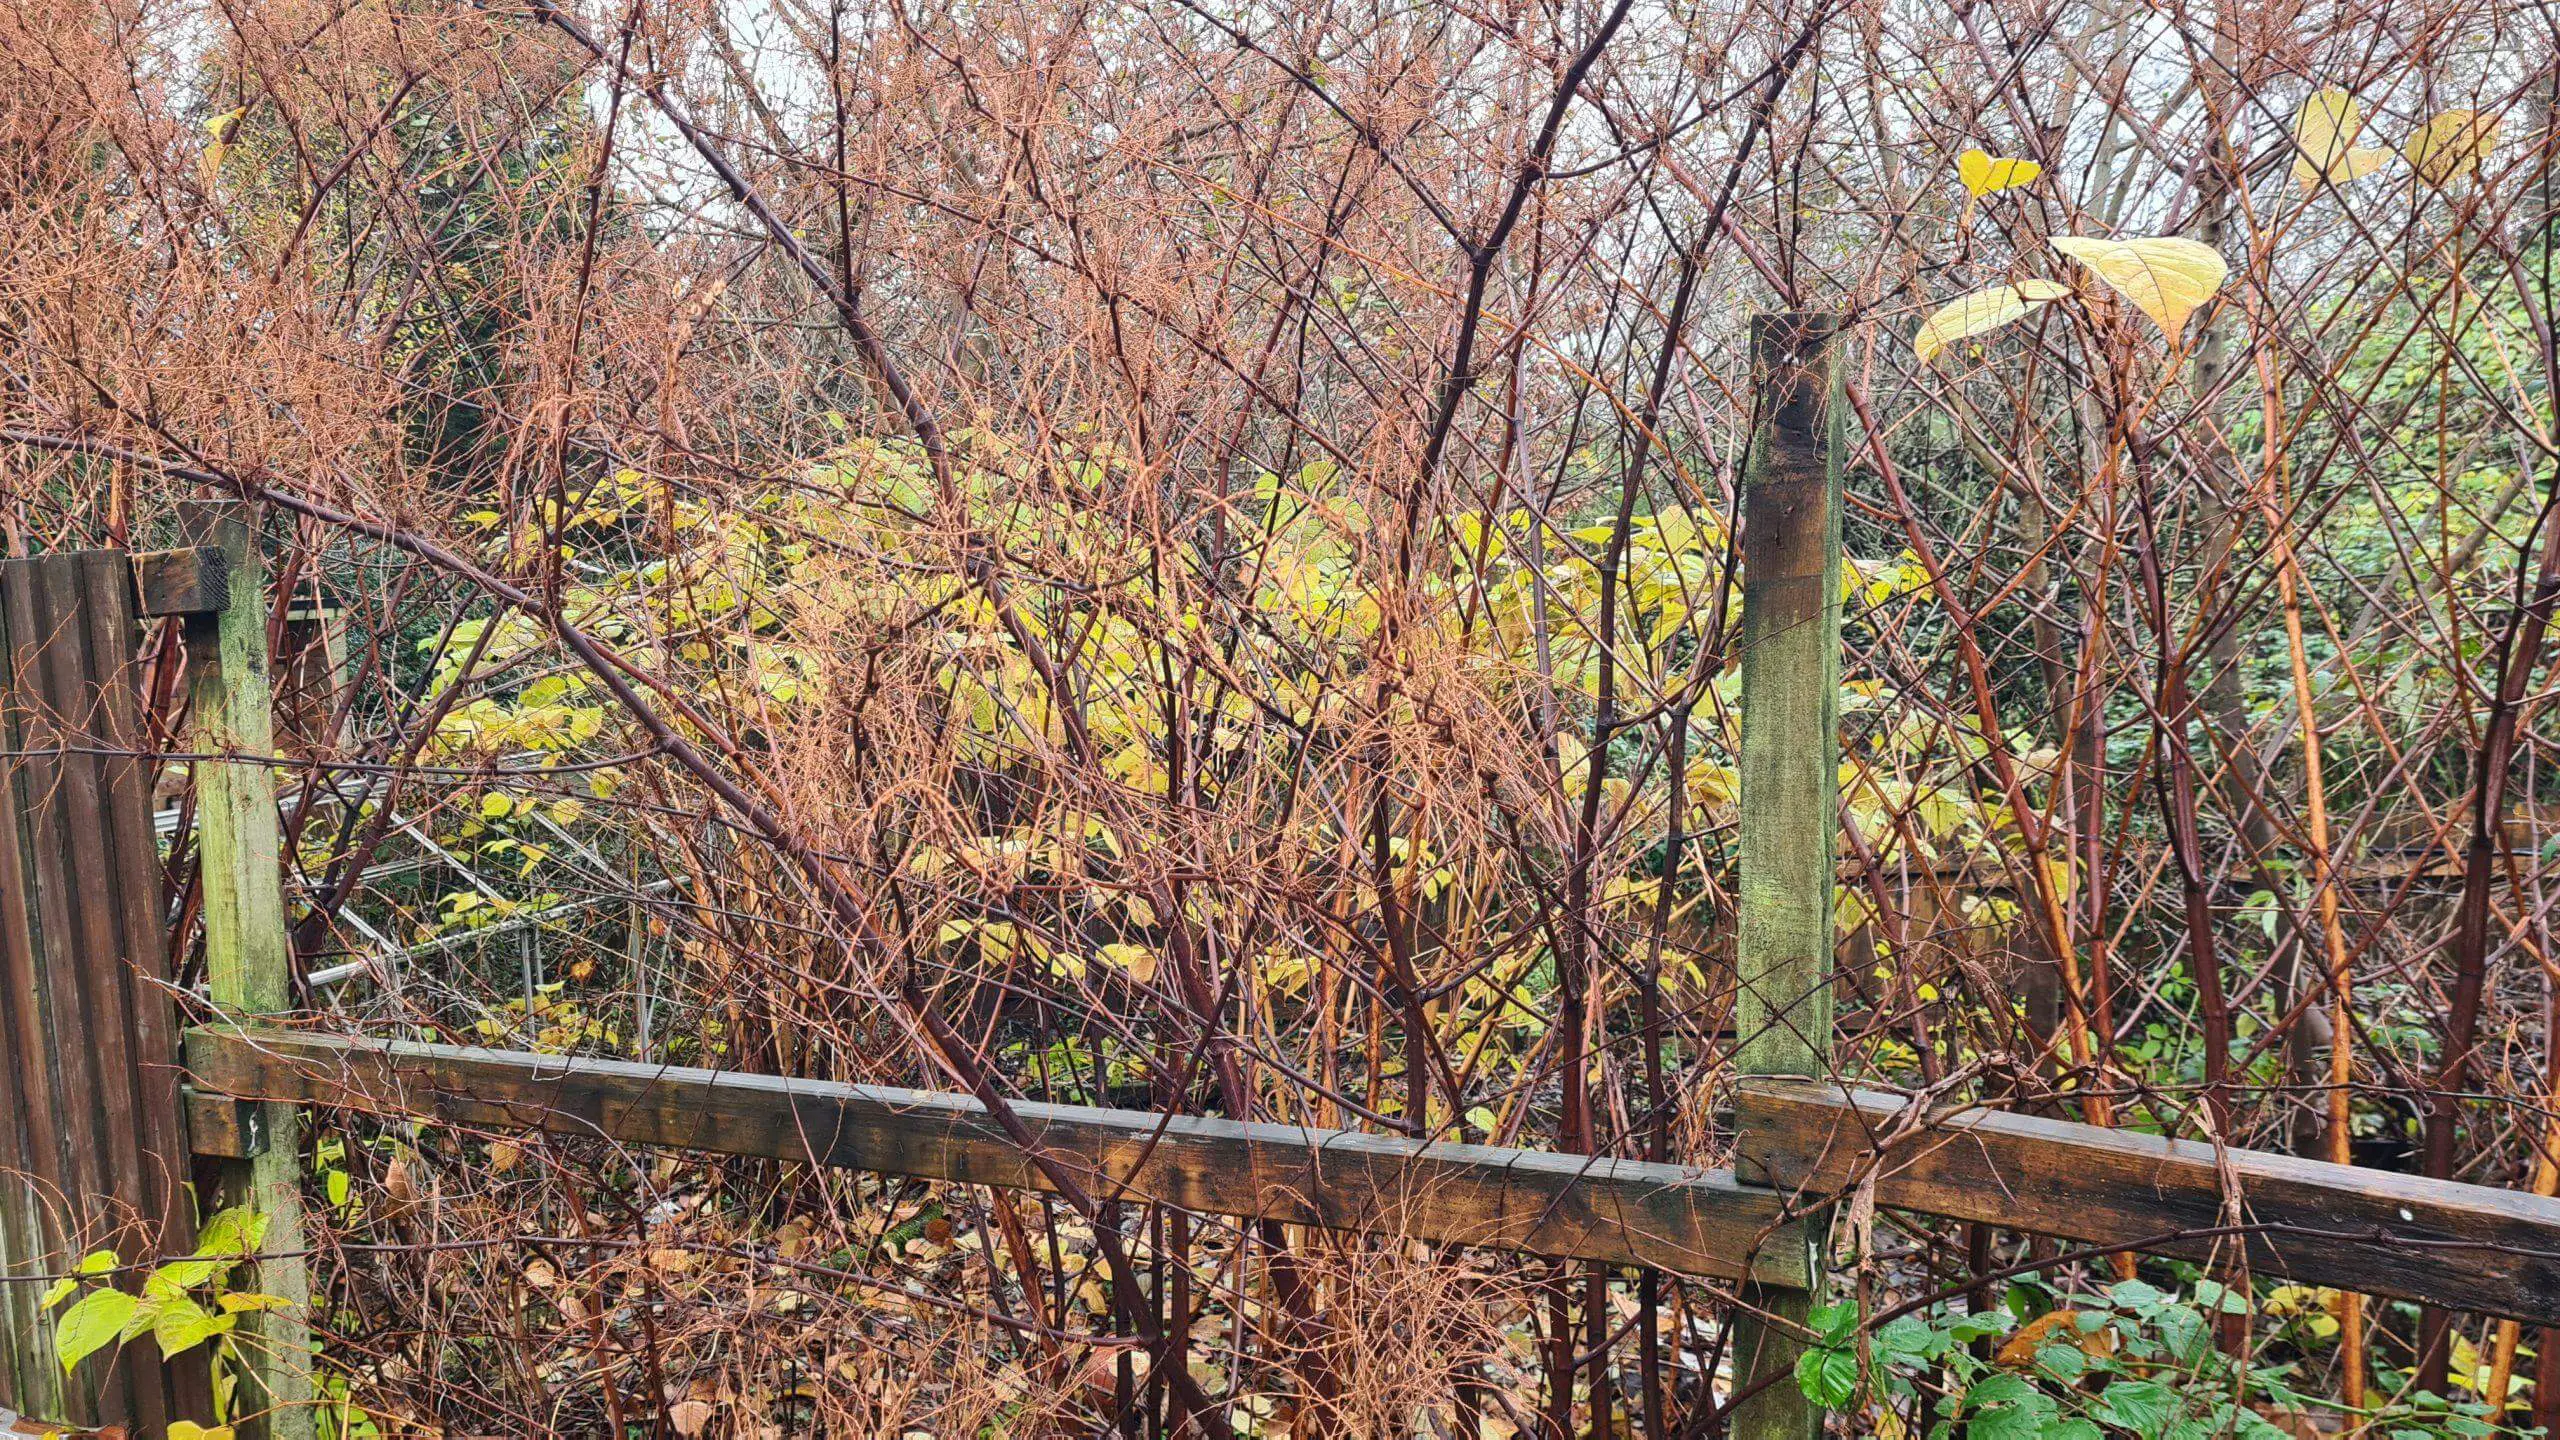 Fence between neighbours which has suffered from the invasion of Japanese knotweed and its effects on property surrounding it